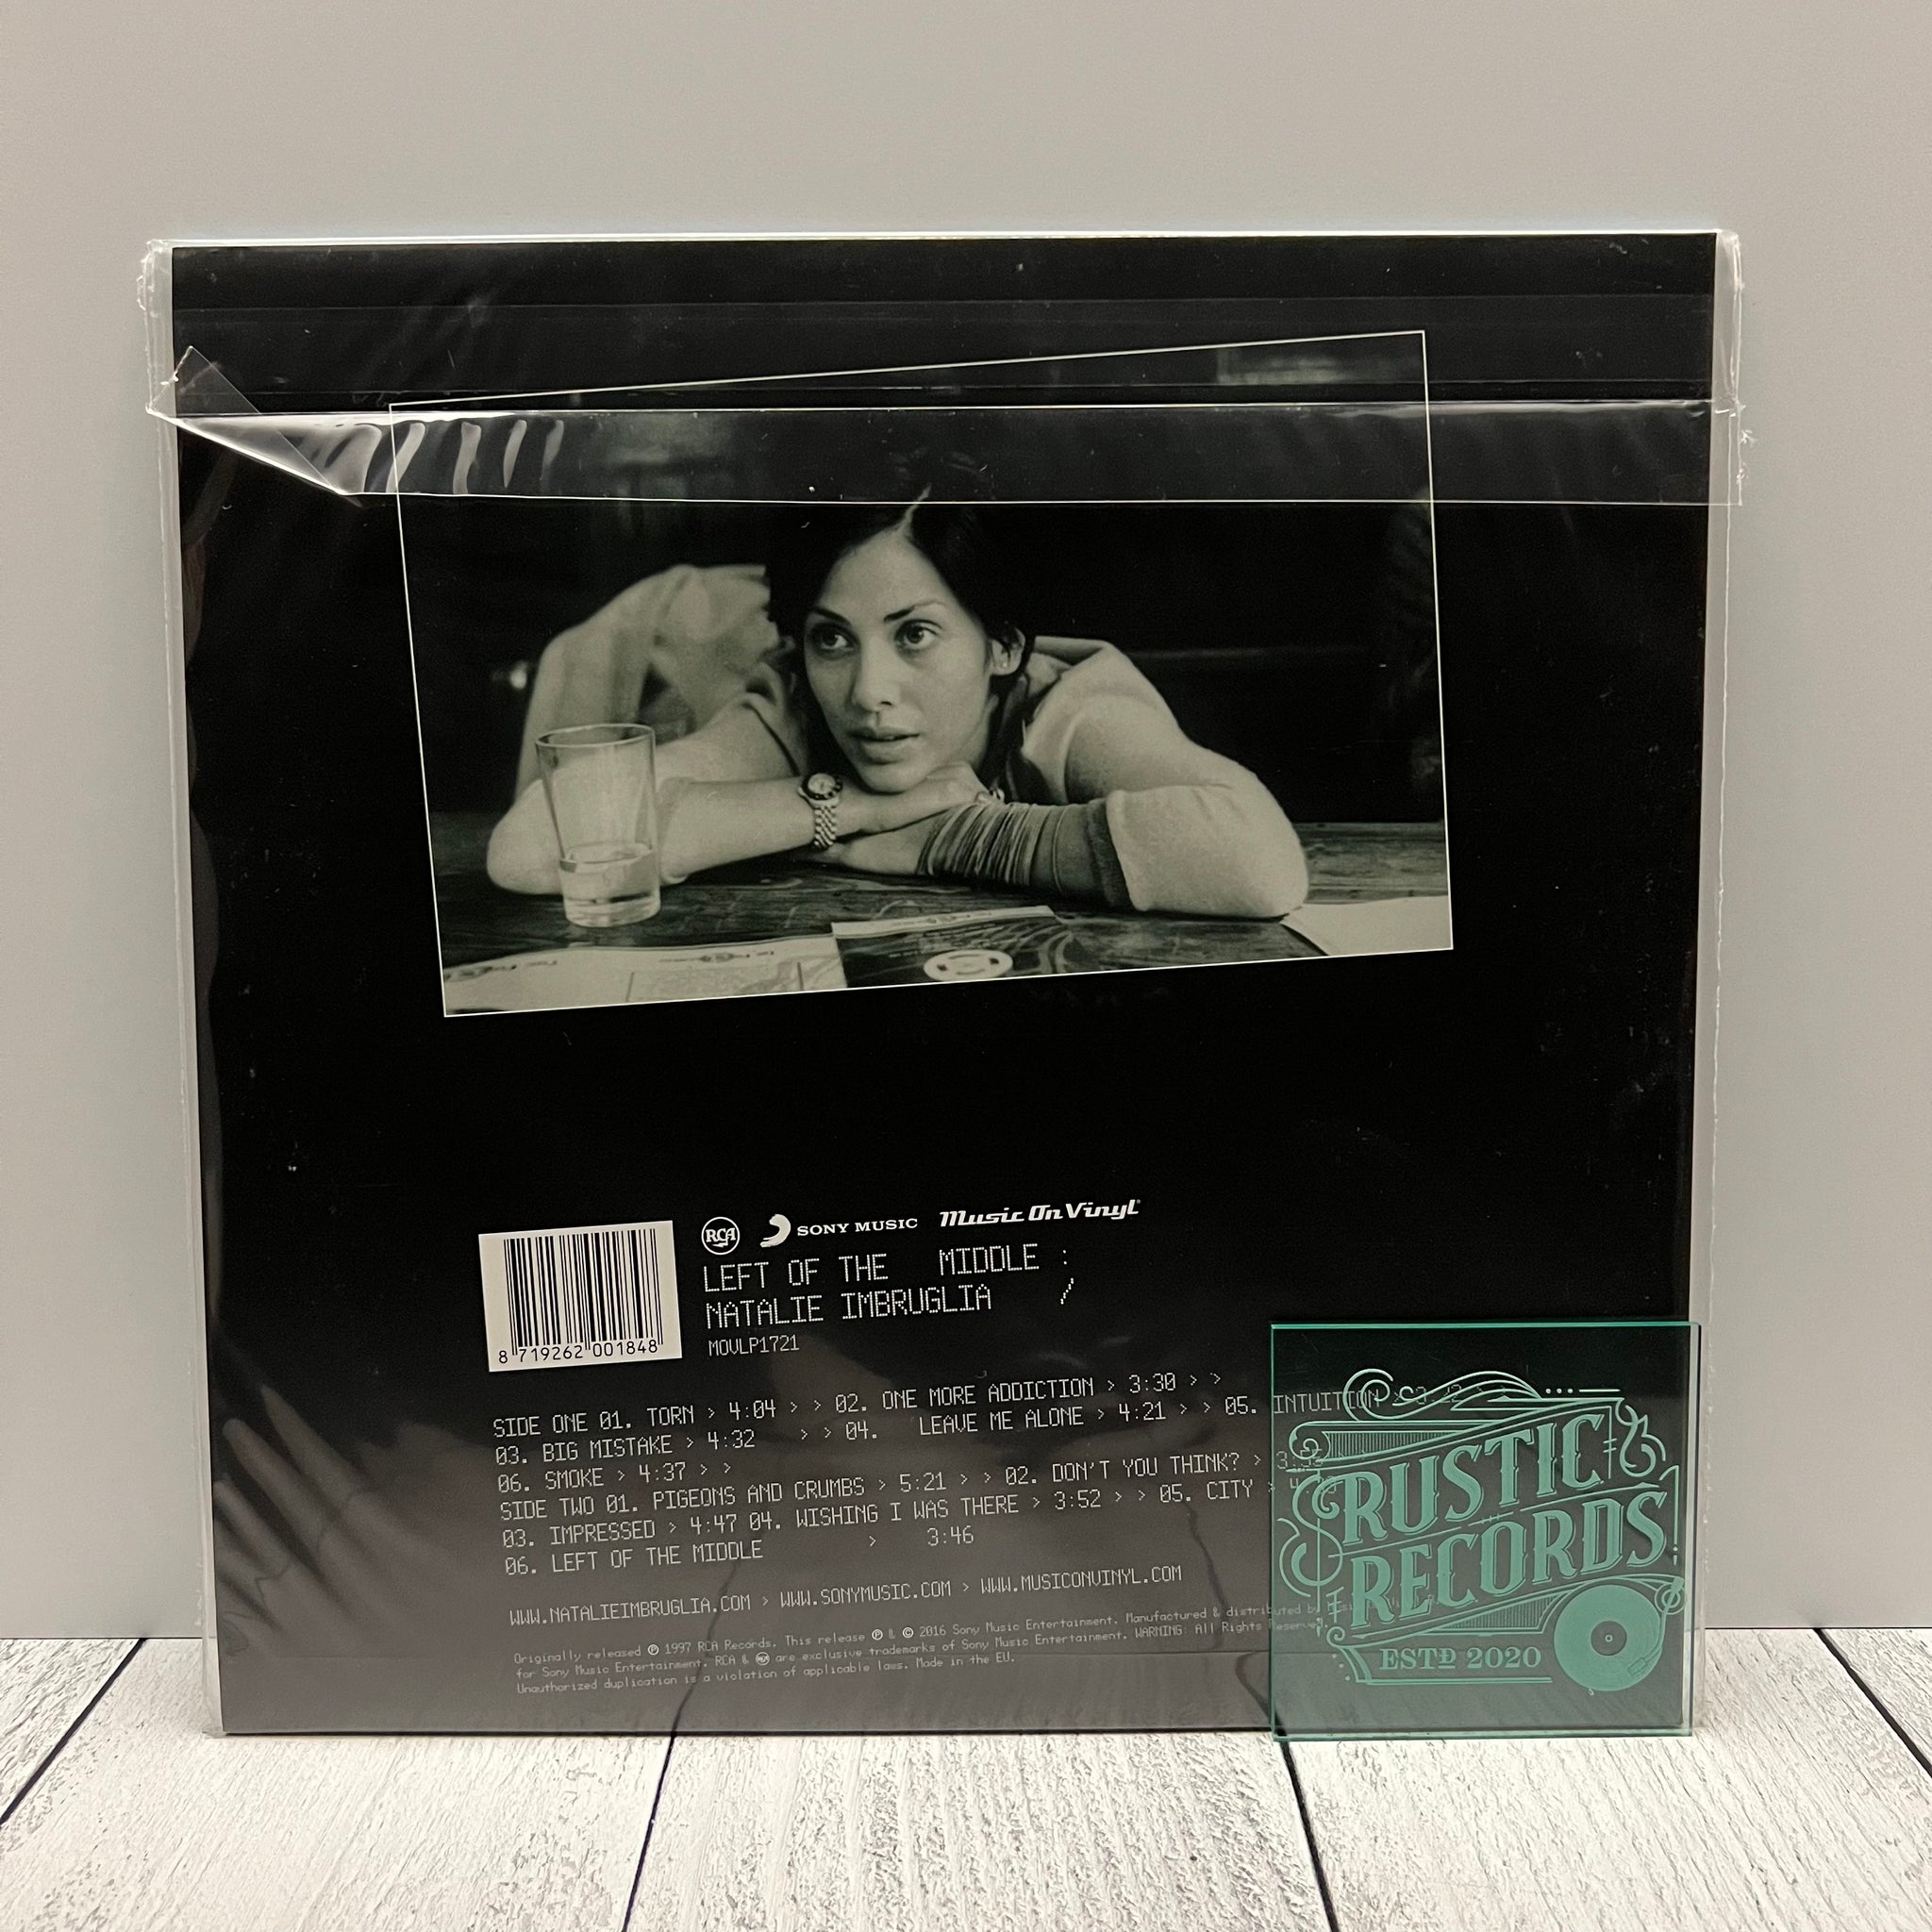 Natalie Imbruglia - Left Of The Middle (Music On Vinyl)